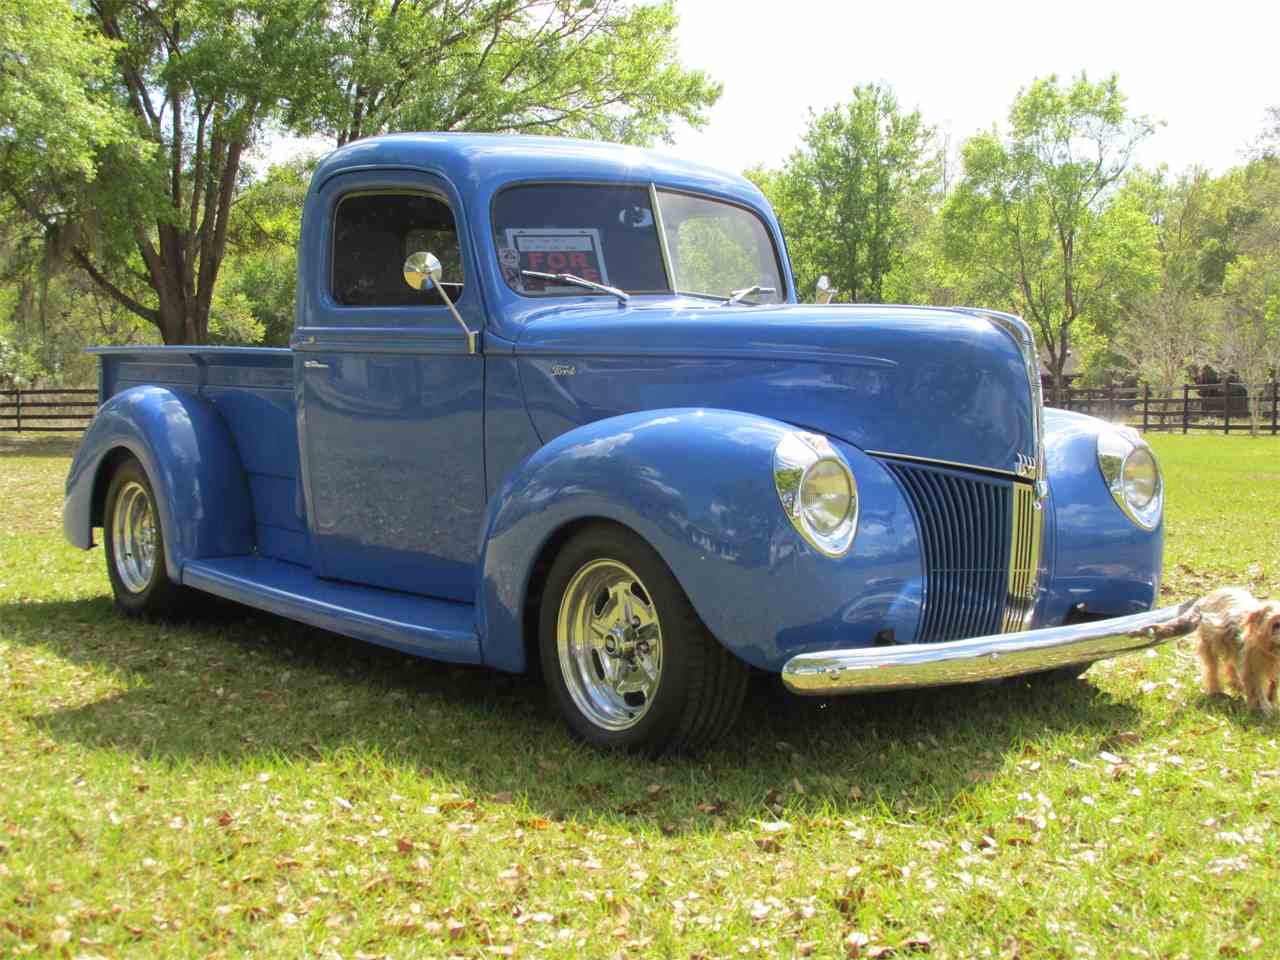 1940 Ford Pickup for Sale  ClassicCars.com  CC964802